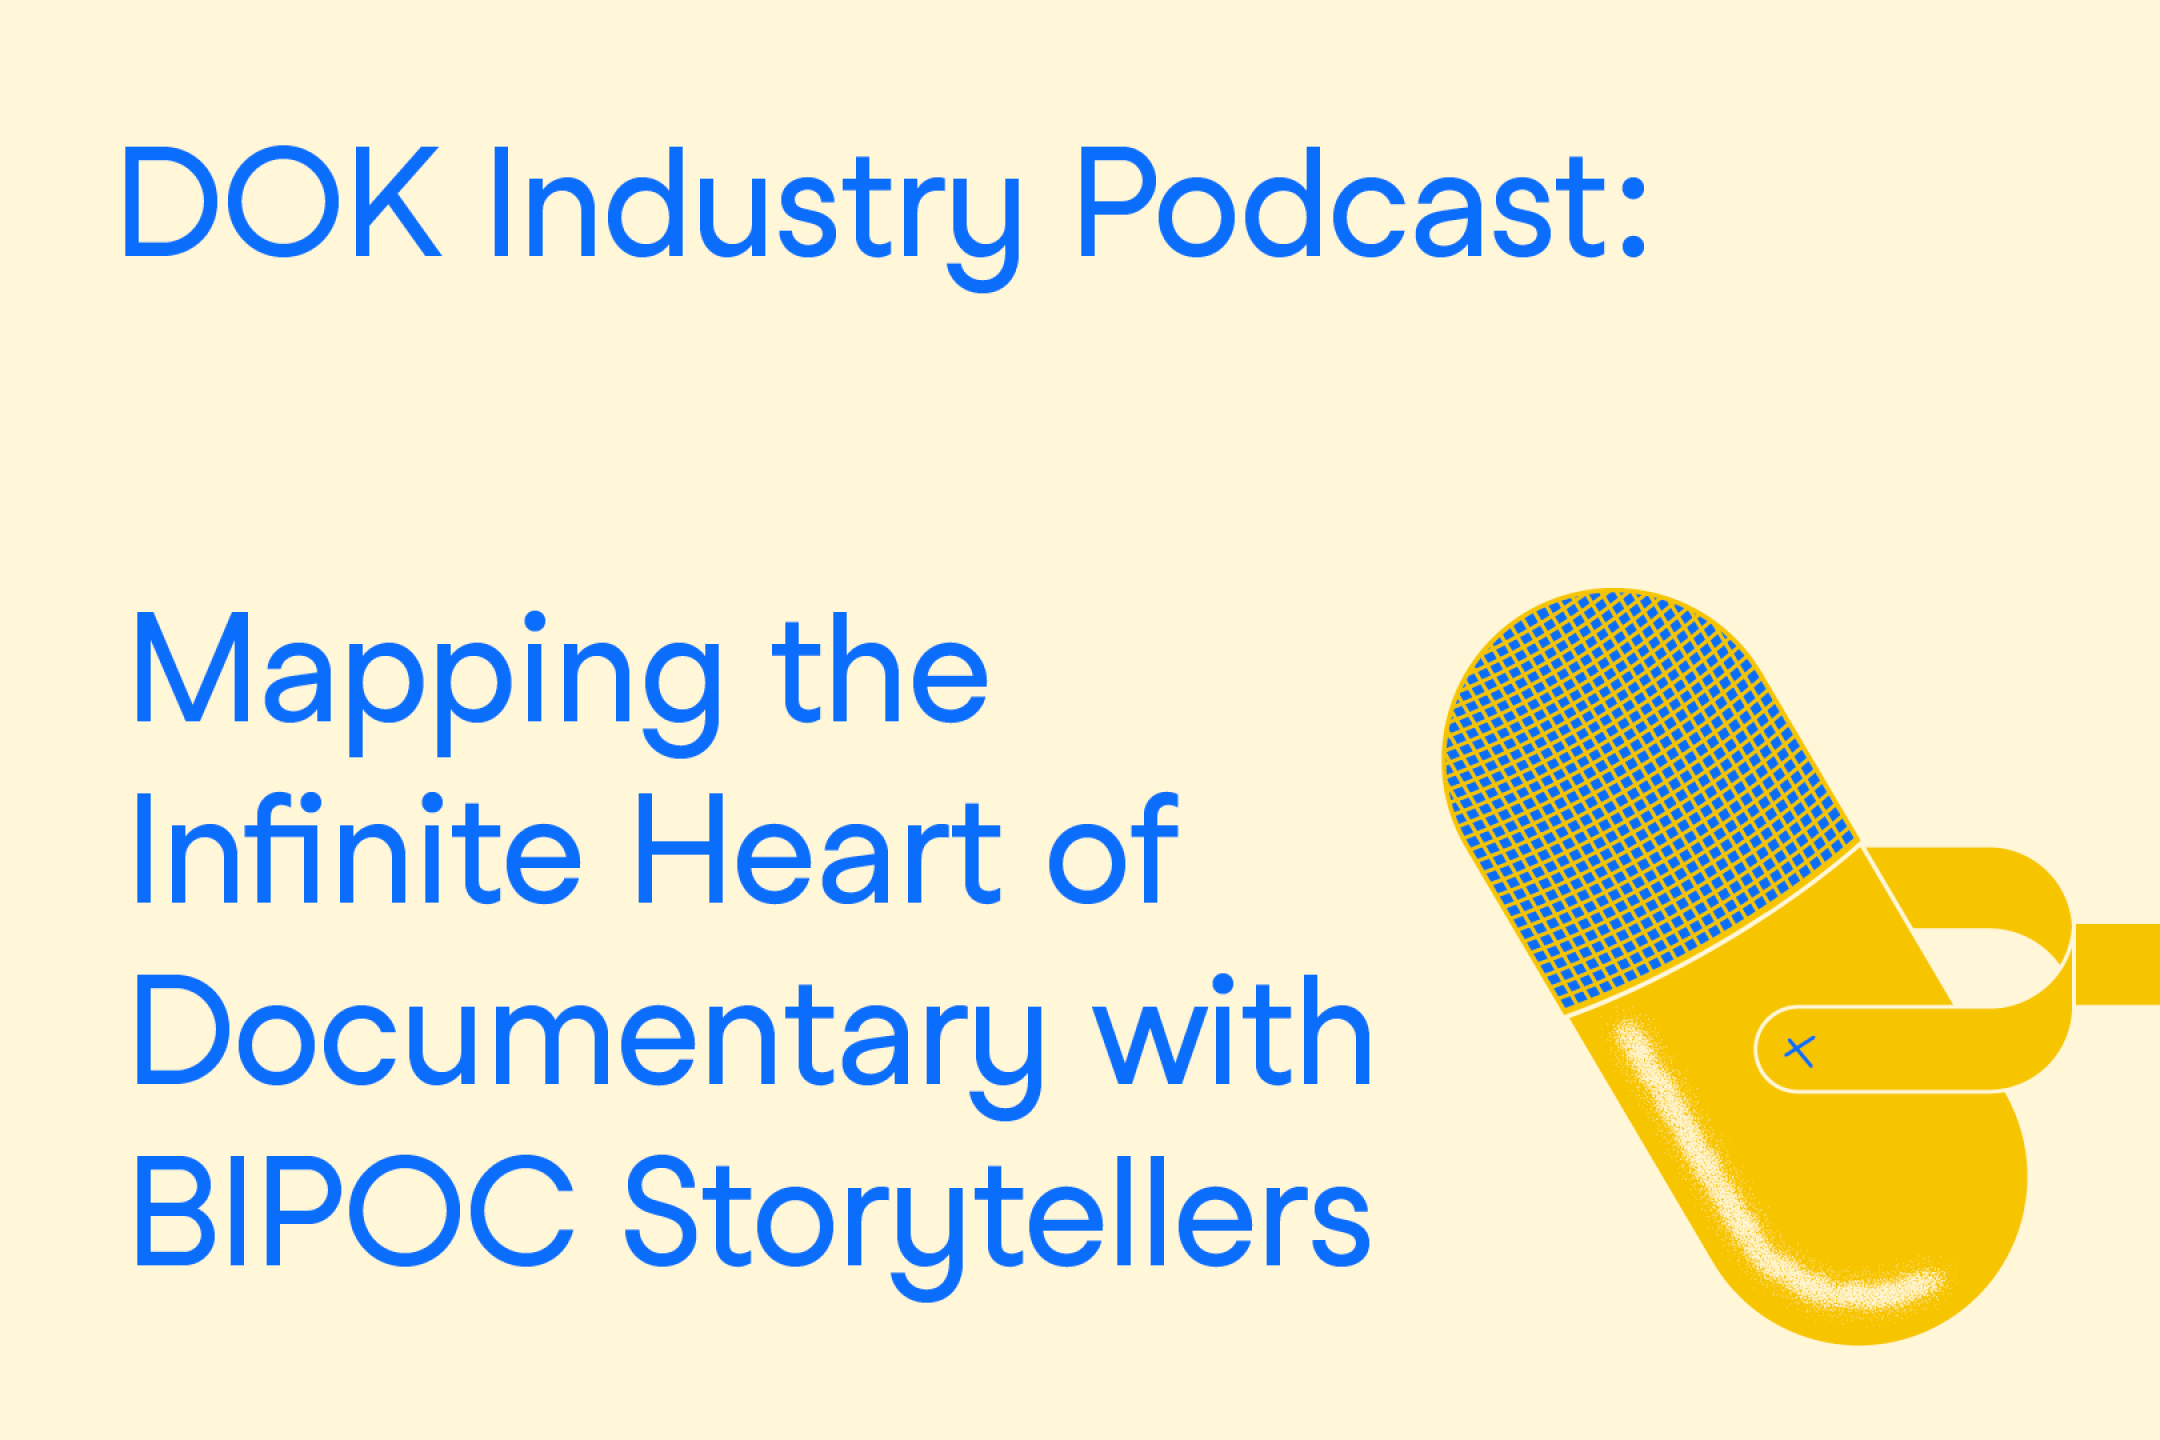 A text graphic with blue letters on a yellow background. At the right the illustration of a microphone. At the left the text: “DOK Industry Podcast: Mapping the Infinite Heart of Documentary with BIPOC Storytellers”